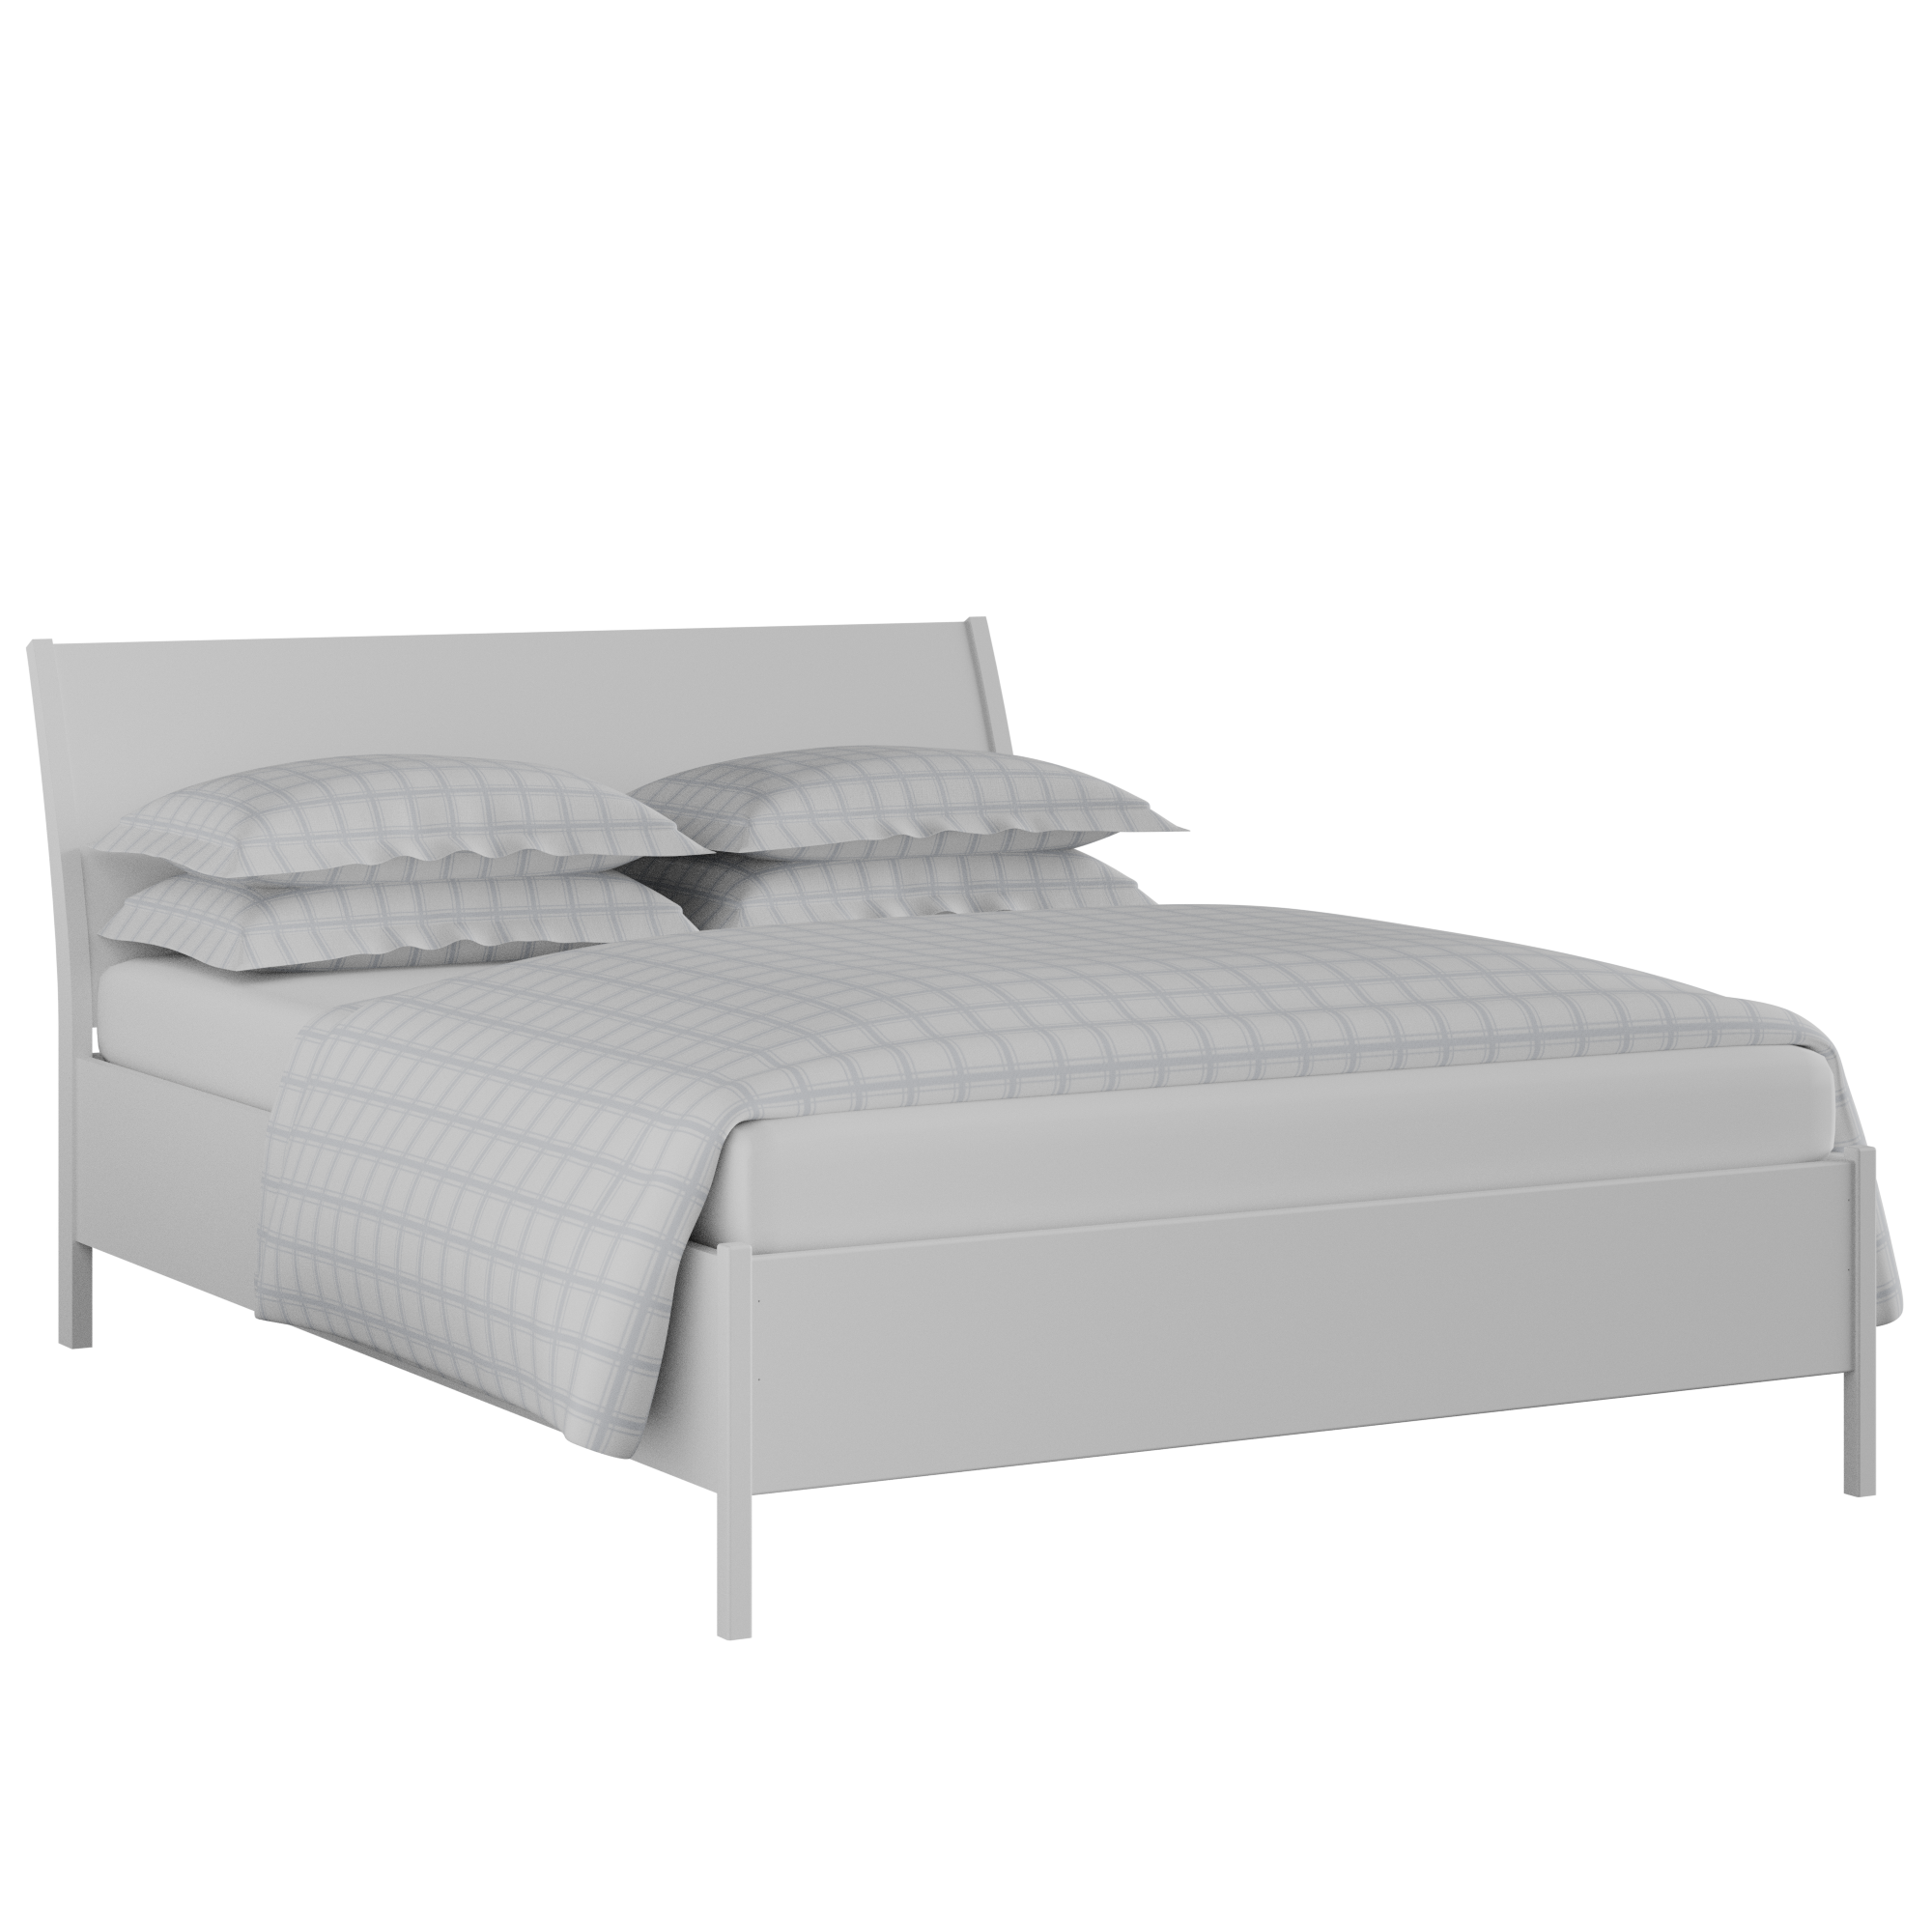 Hunt Painted painted wood bed in white with Juno mattress